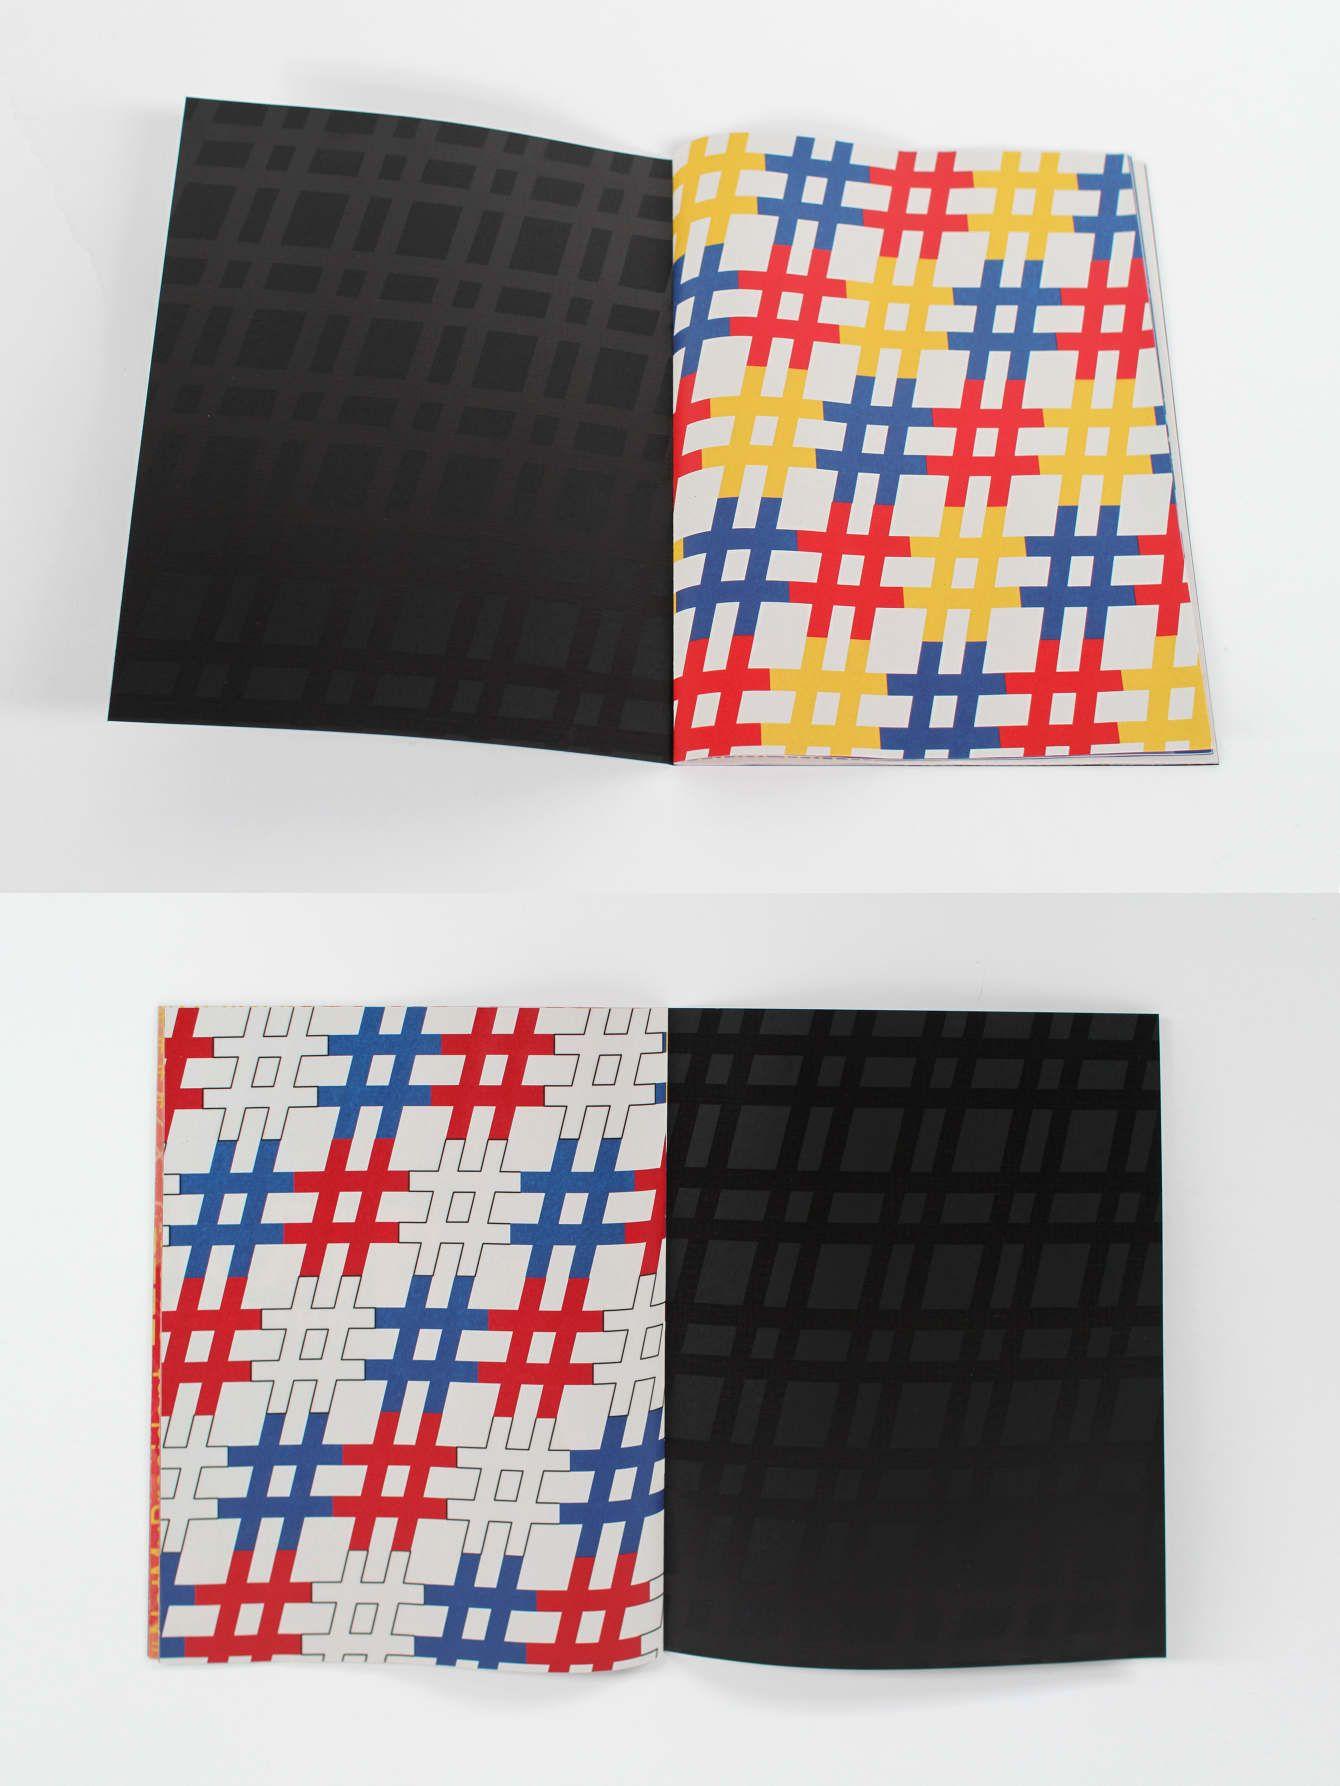 There are two rectangular images, one on top and one on the bottom. On both images, there is a magazine style booklet open to pages with graphic design. On the top photo, there is a black on black gingham design for the whole page. On the right of the top